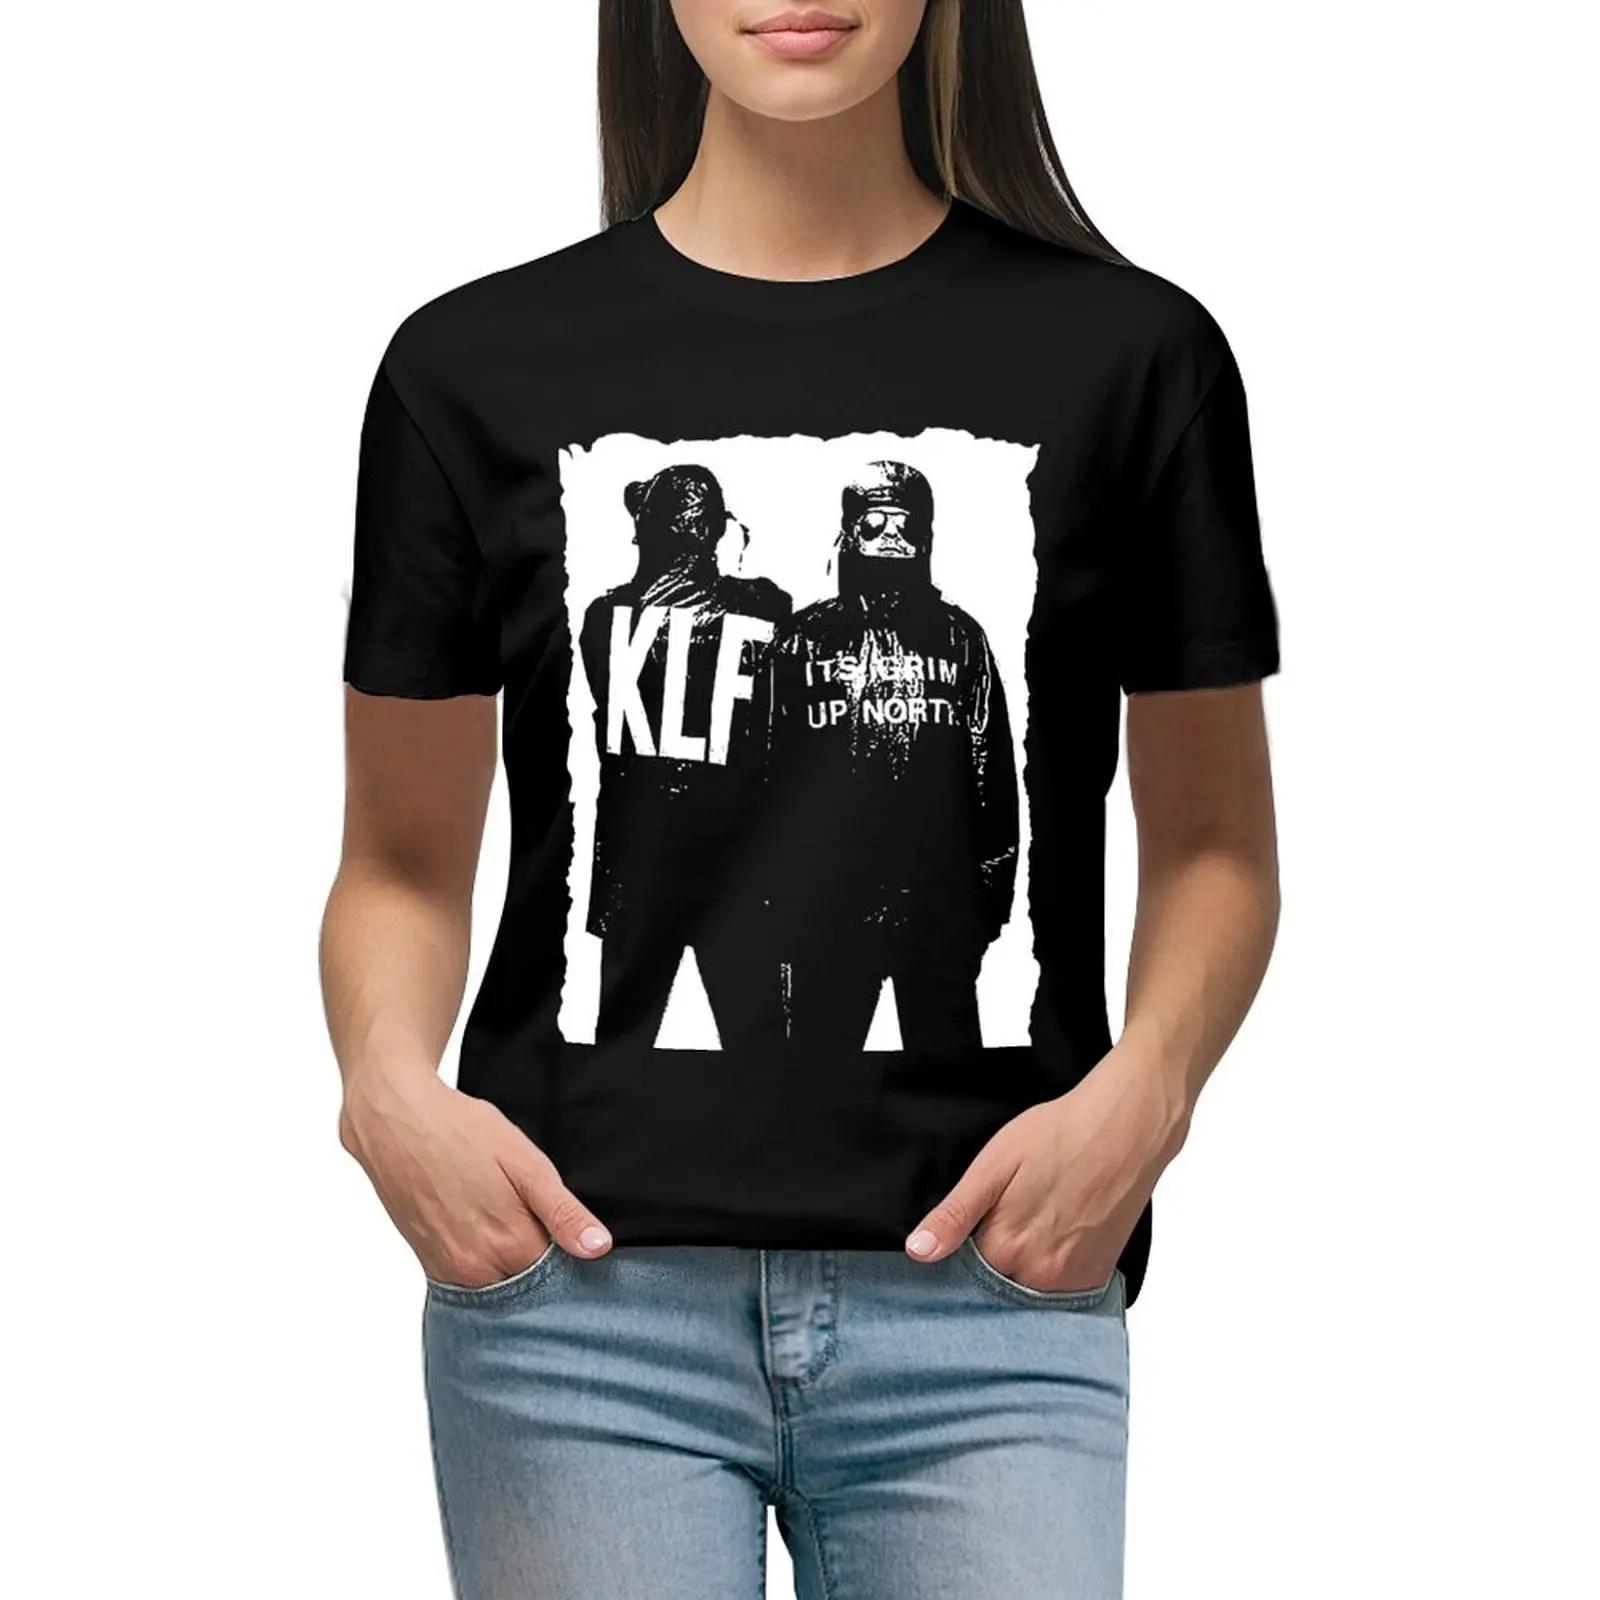 

THE KLF Essential T-shirt funny female t-shirt dress for Women plus size sexy